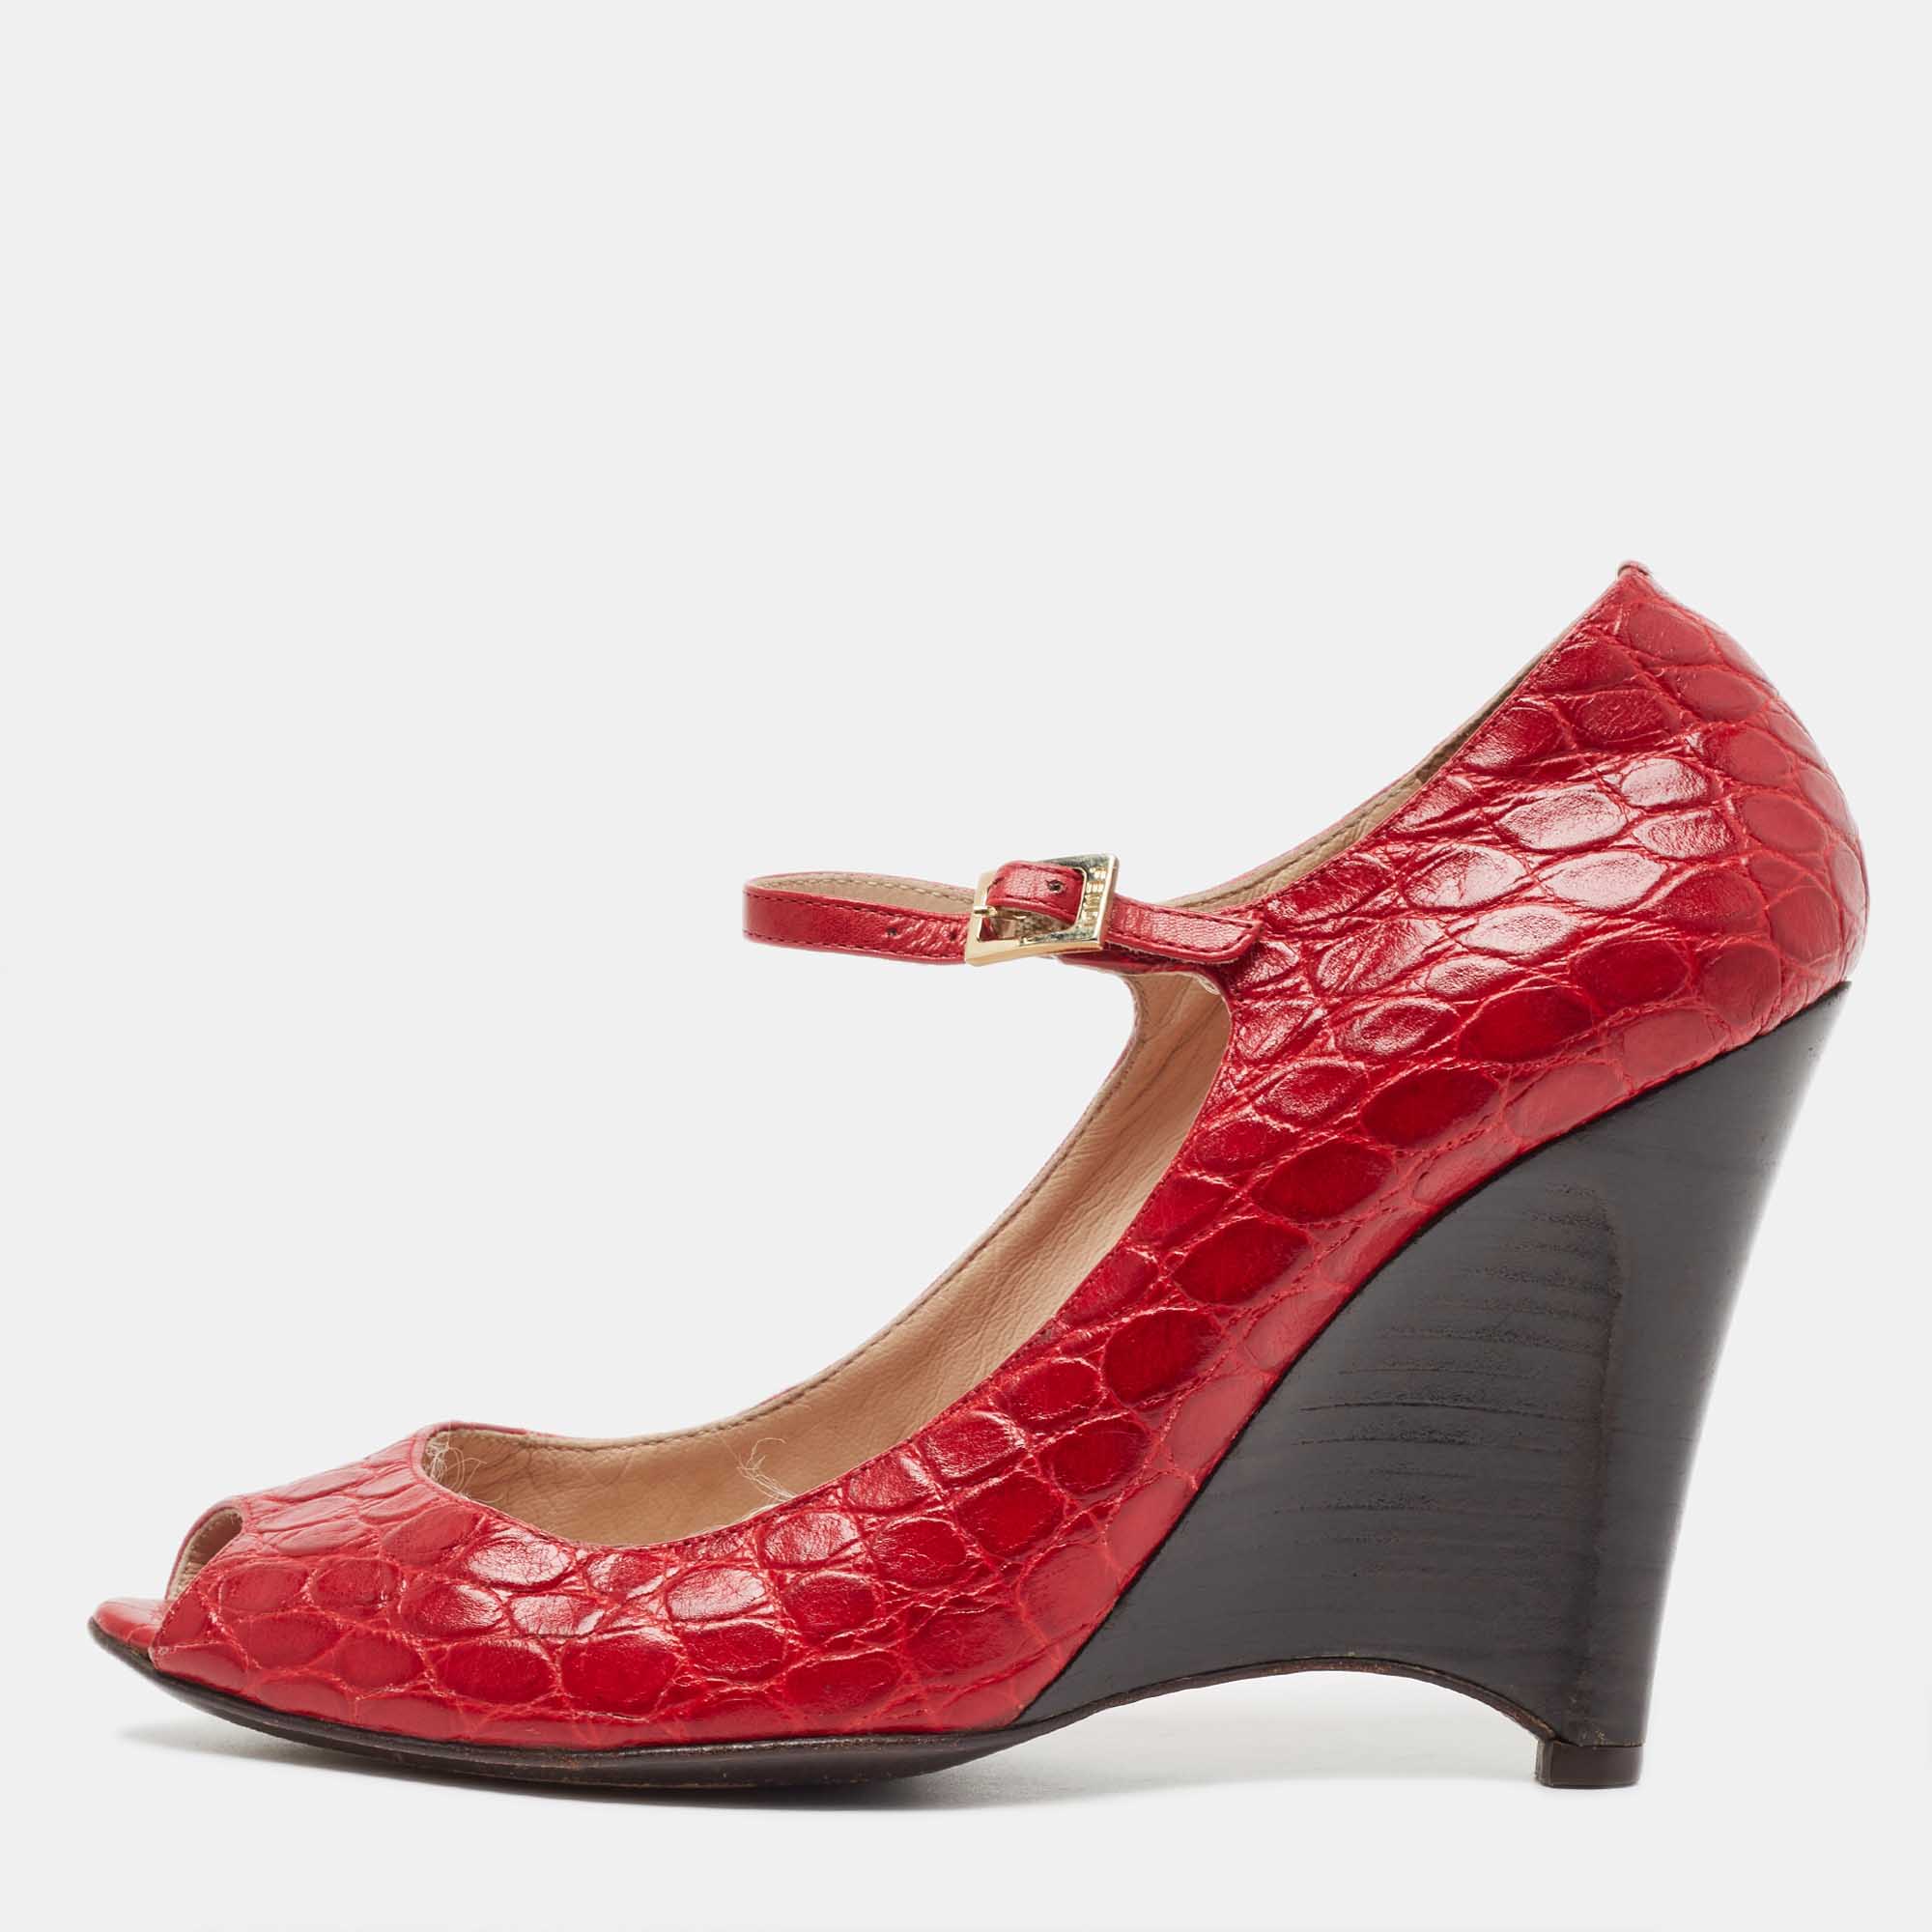 Pre-owned Fendi Red Croc Embossed Leather Peep Toe Wedges Pumps Size 39.5